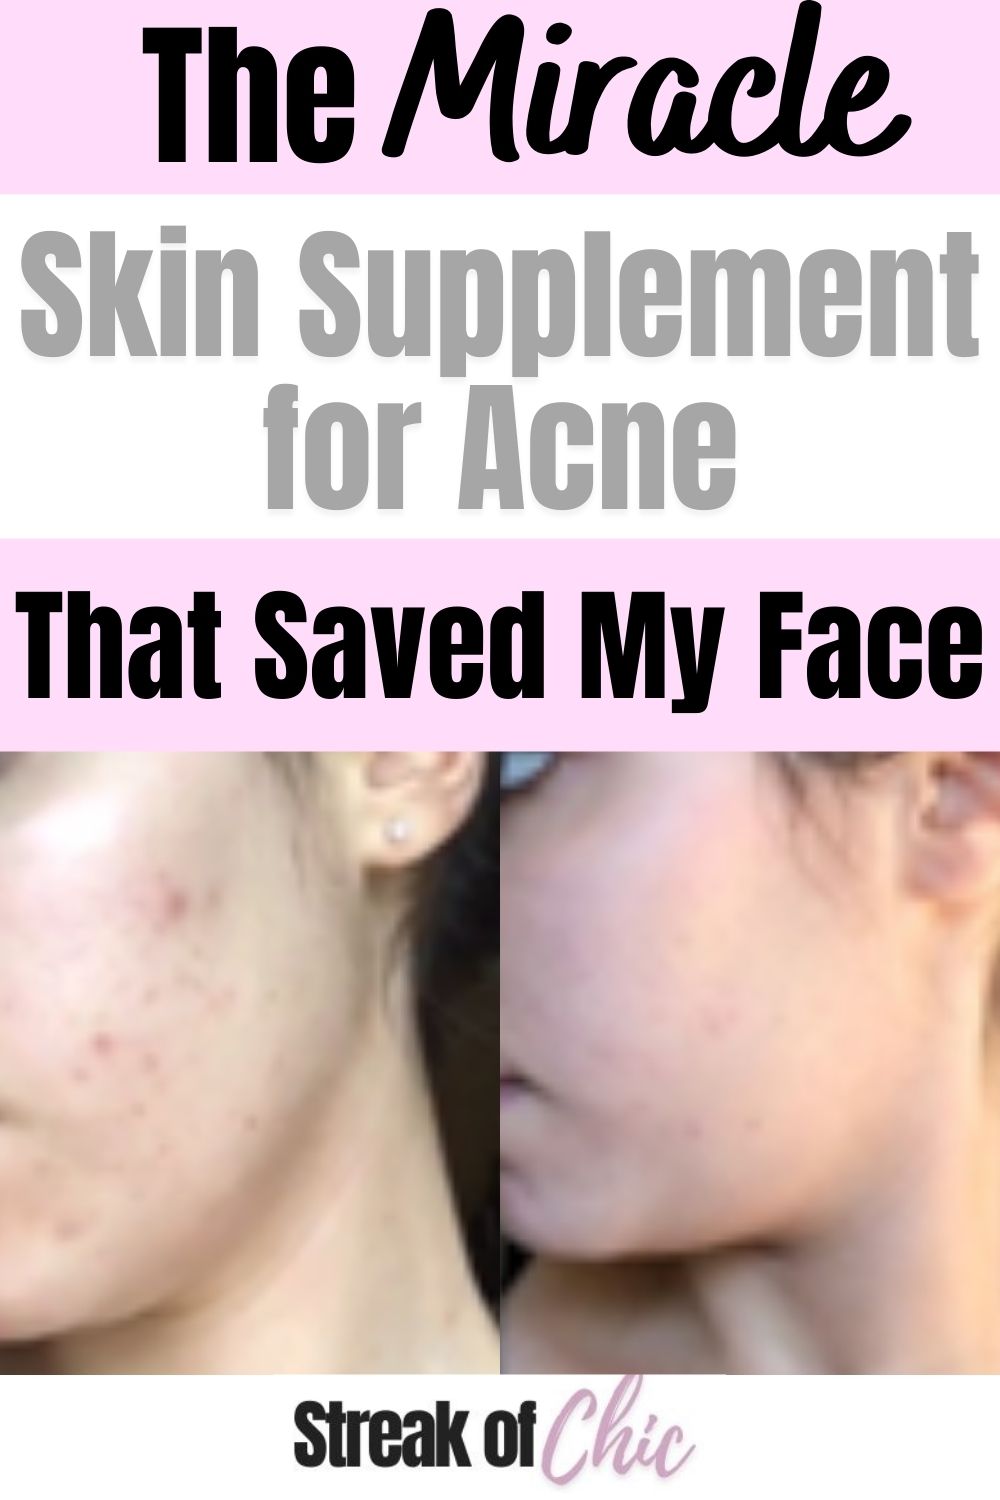 The Best Skin Supplement for Acne that Saved My Face